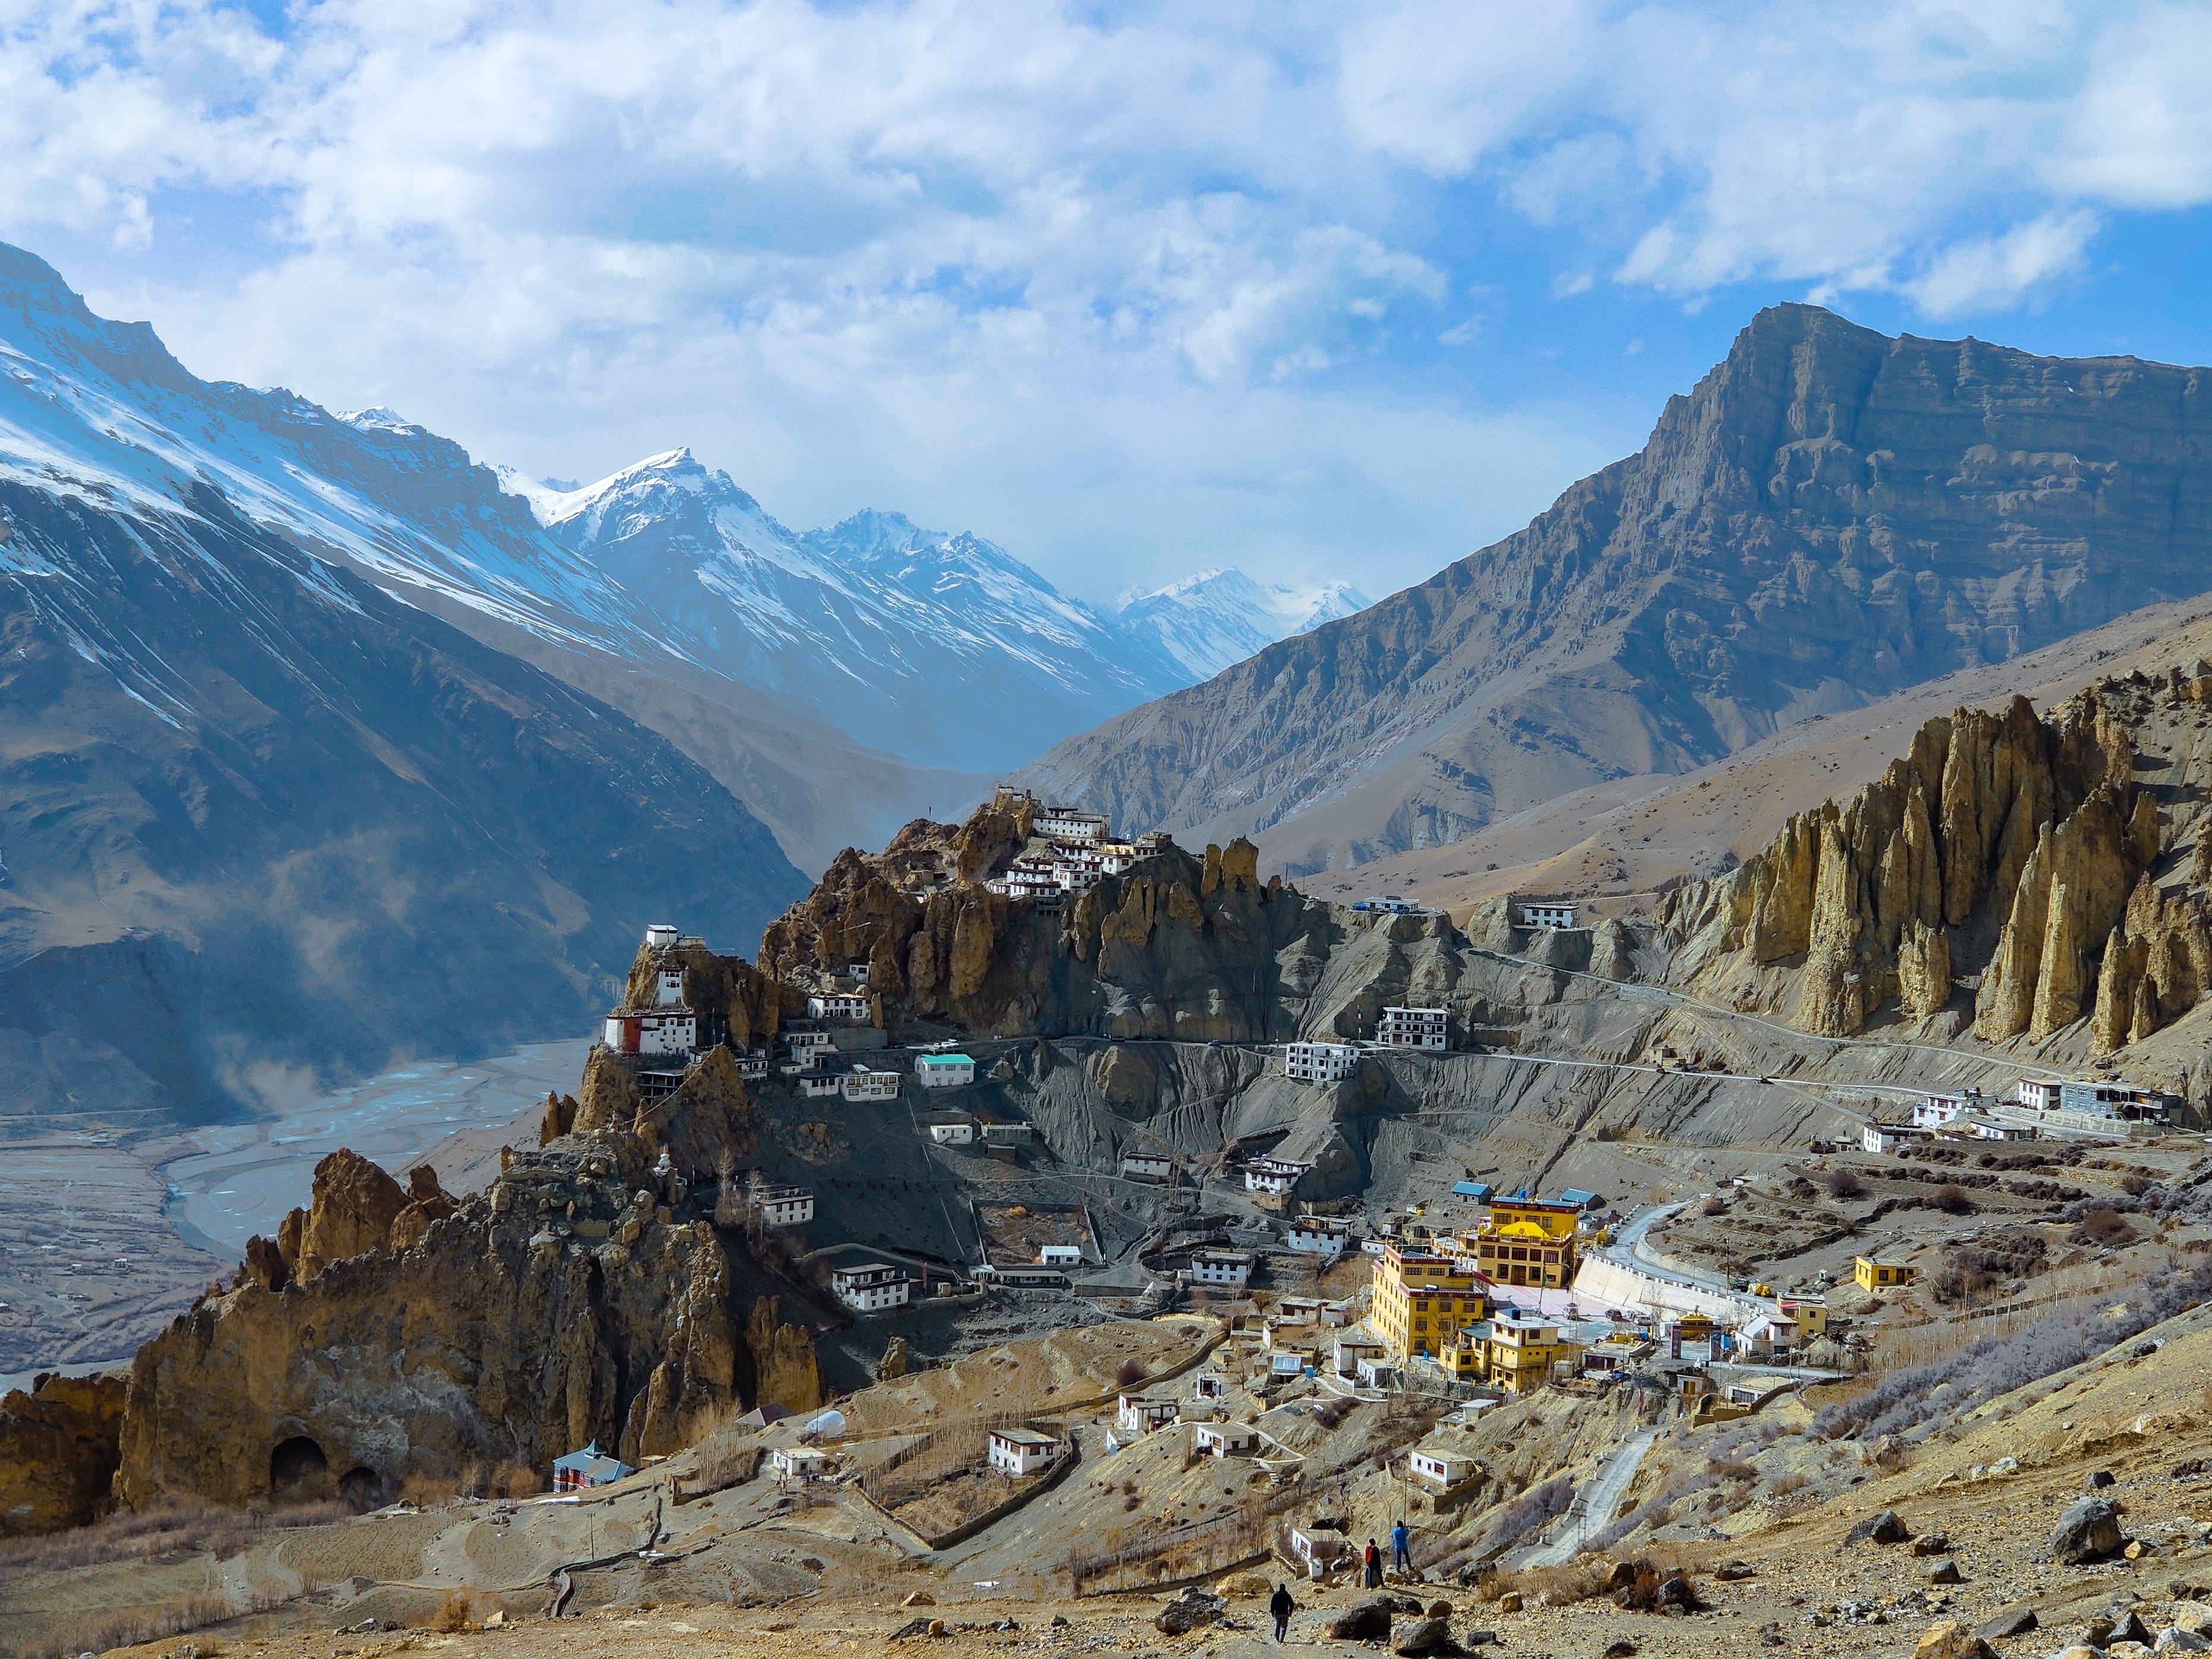 Lhalung Monastery: A Spiritual Haven in Spiti Valley